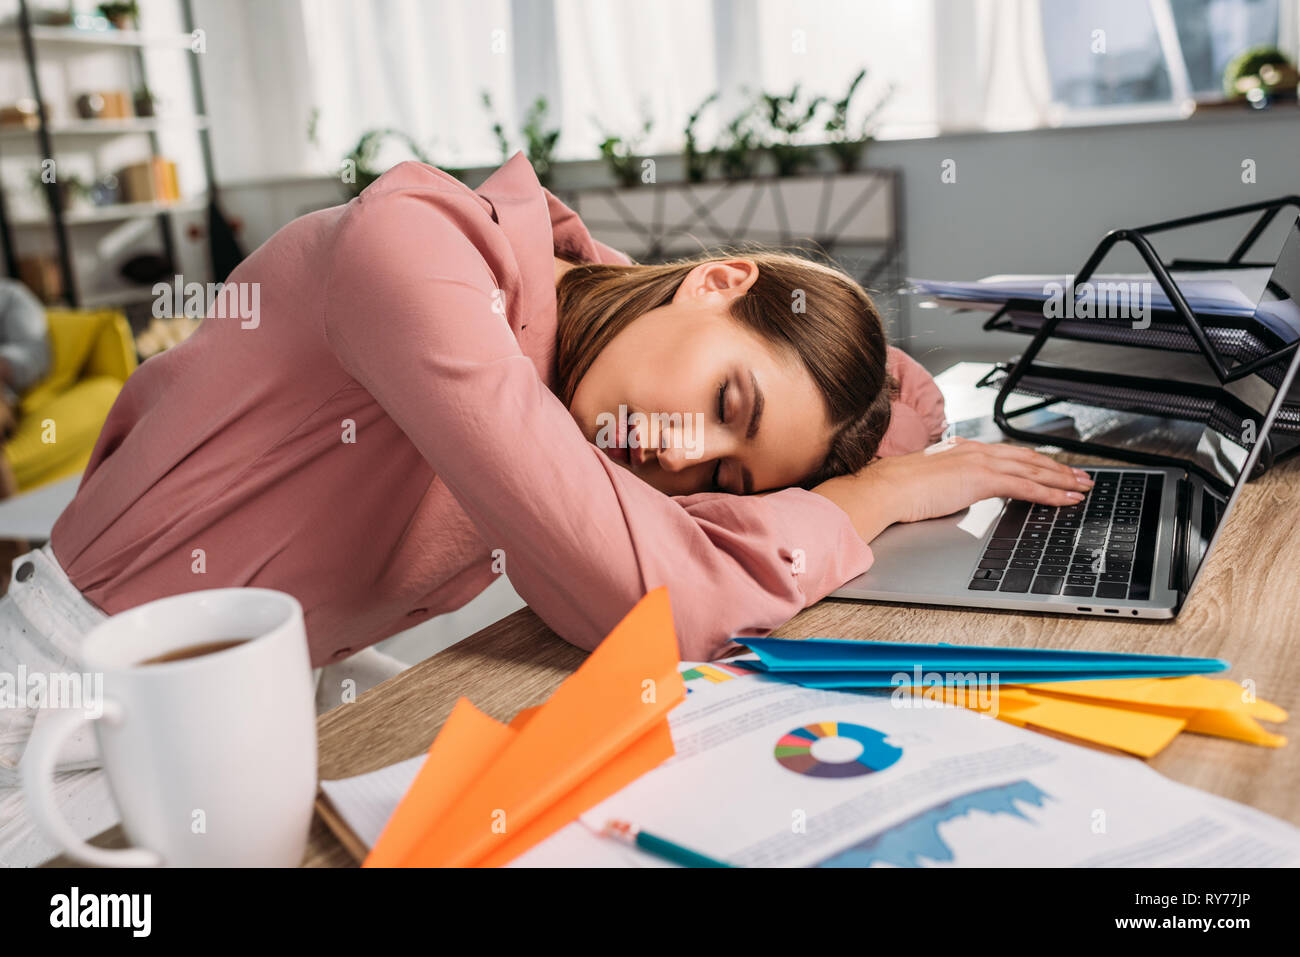 Attractive Woman Sleeping At Desk Near Laptop At Home Stock Photo